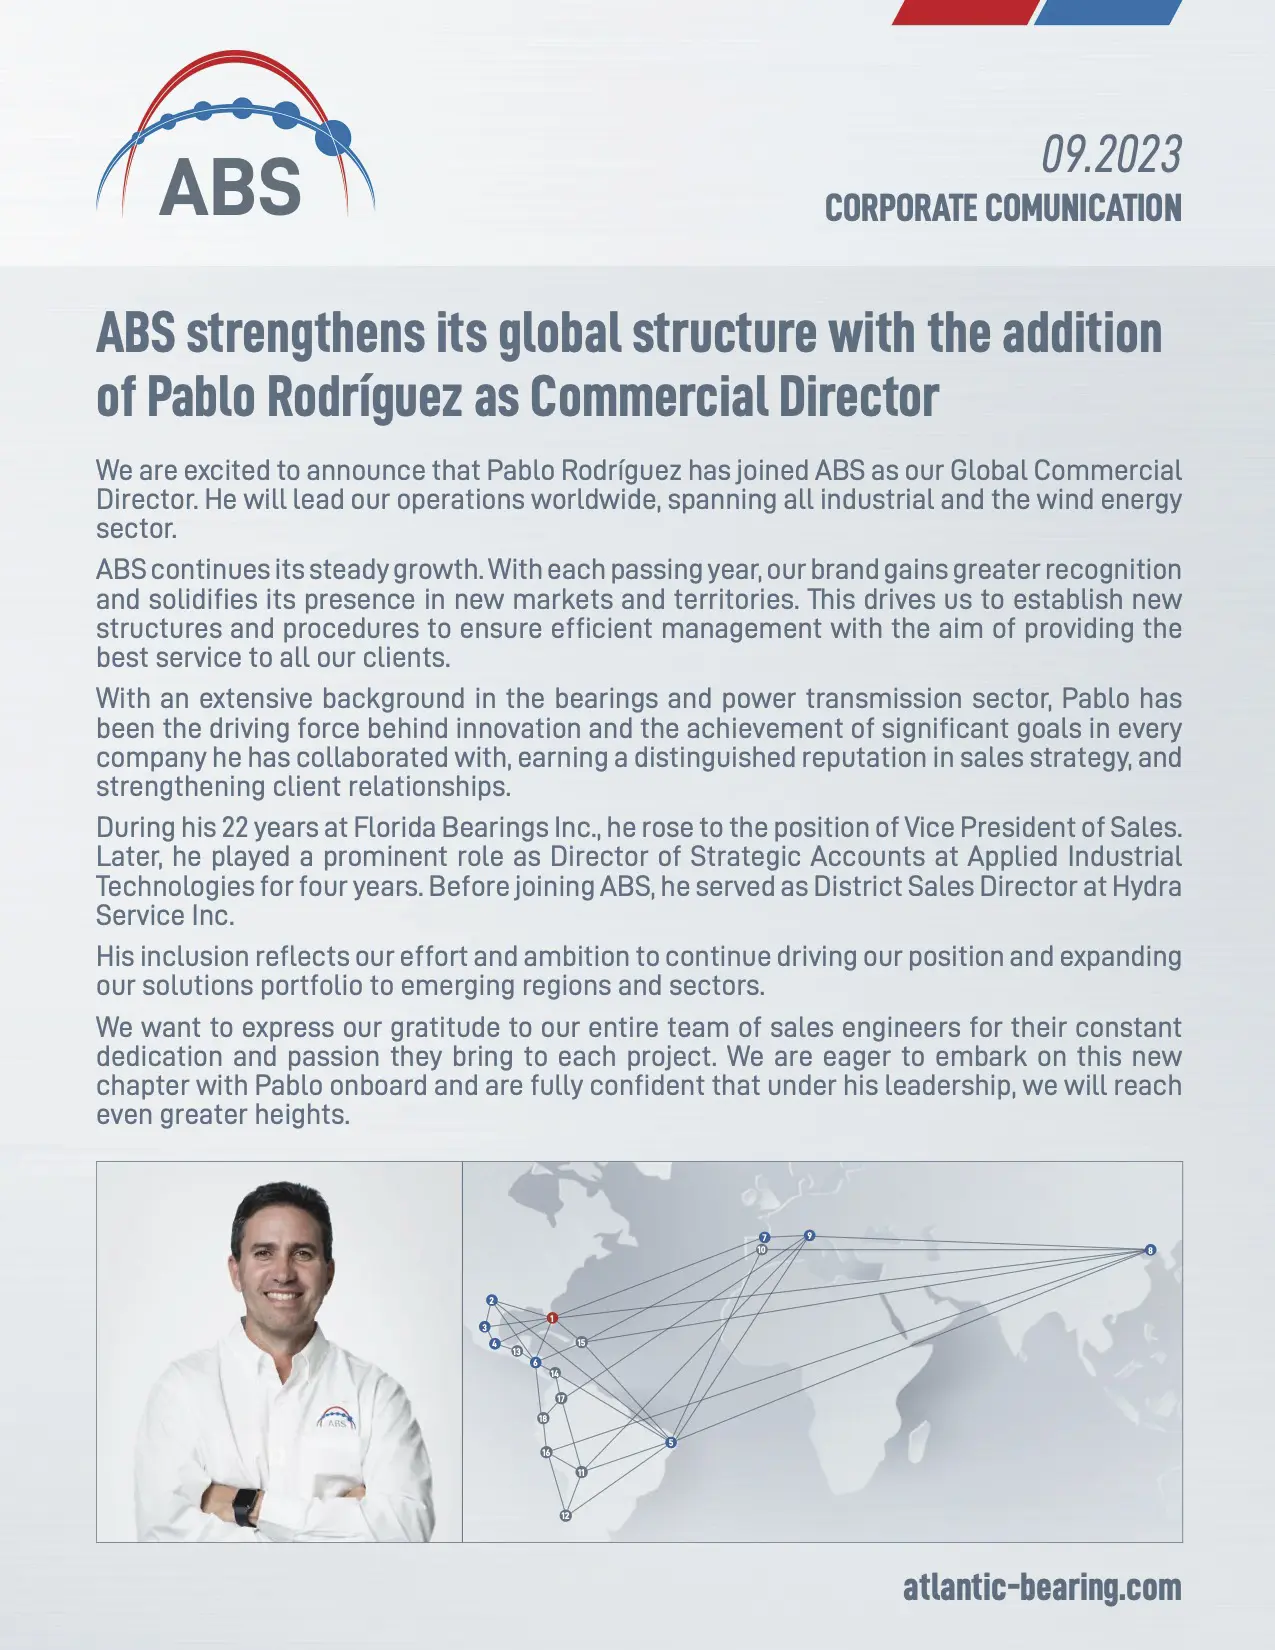 Pablo Rodriguez new Commercial Director of ABS